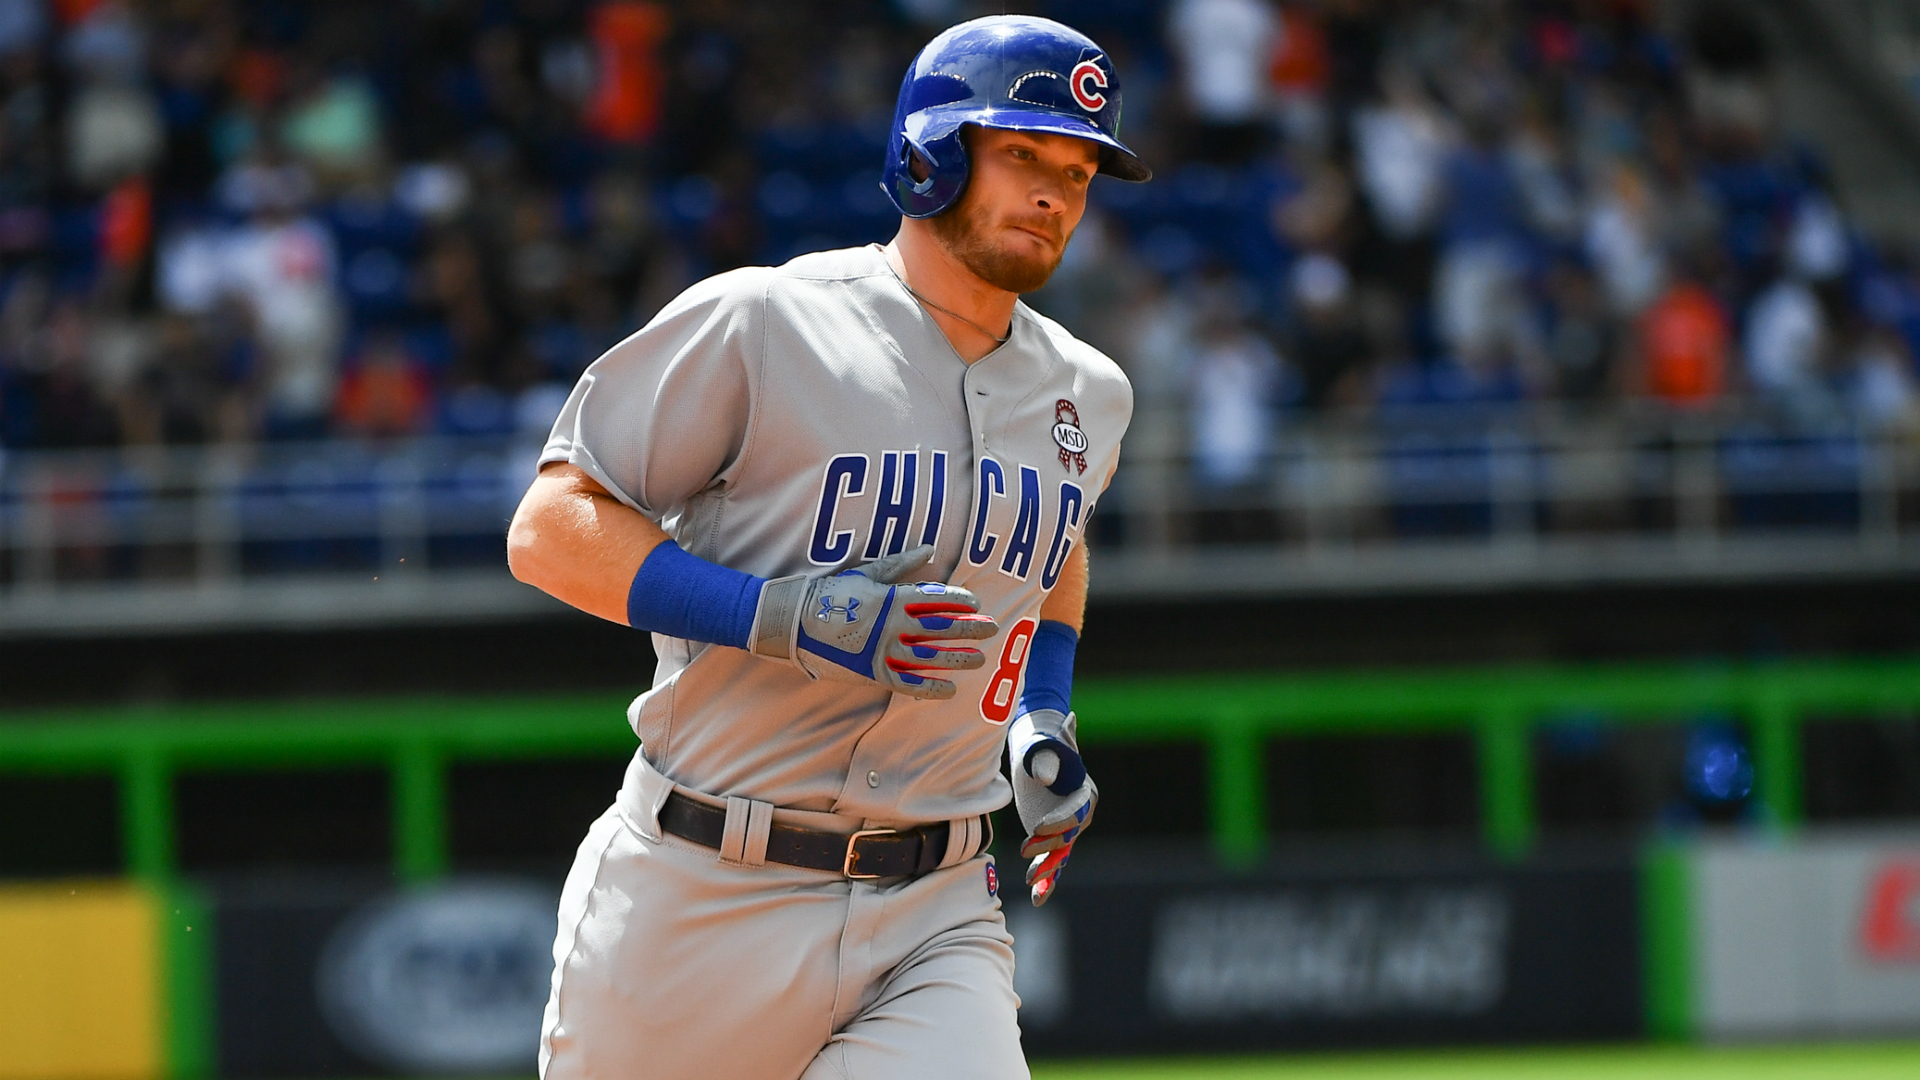 Cubs reporter jumps in Lake Michigan to fulfill promise after Ian Happ